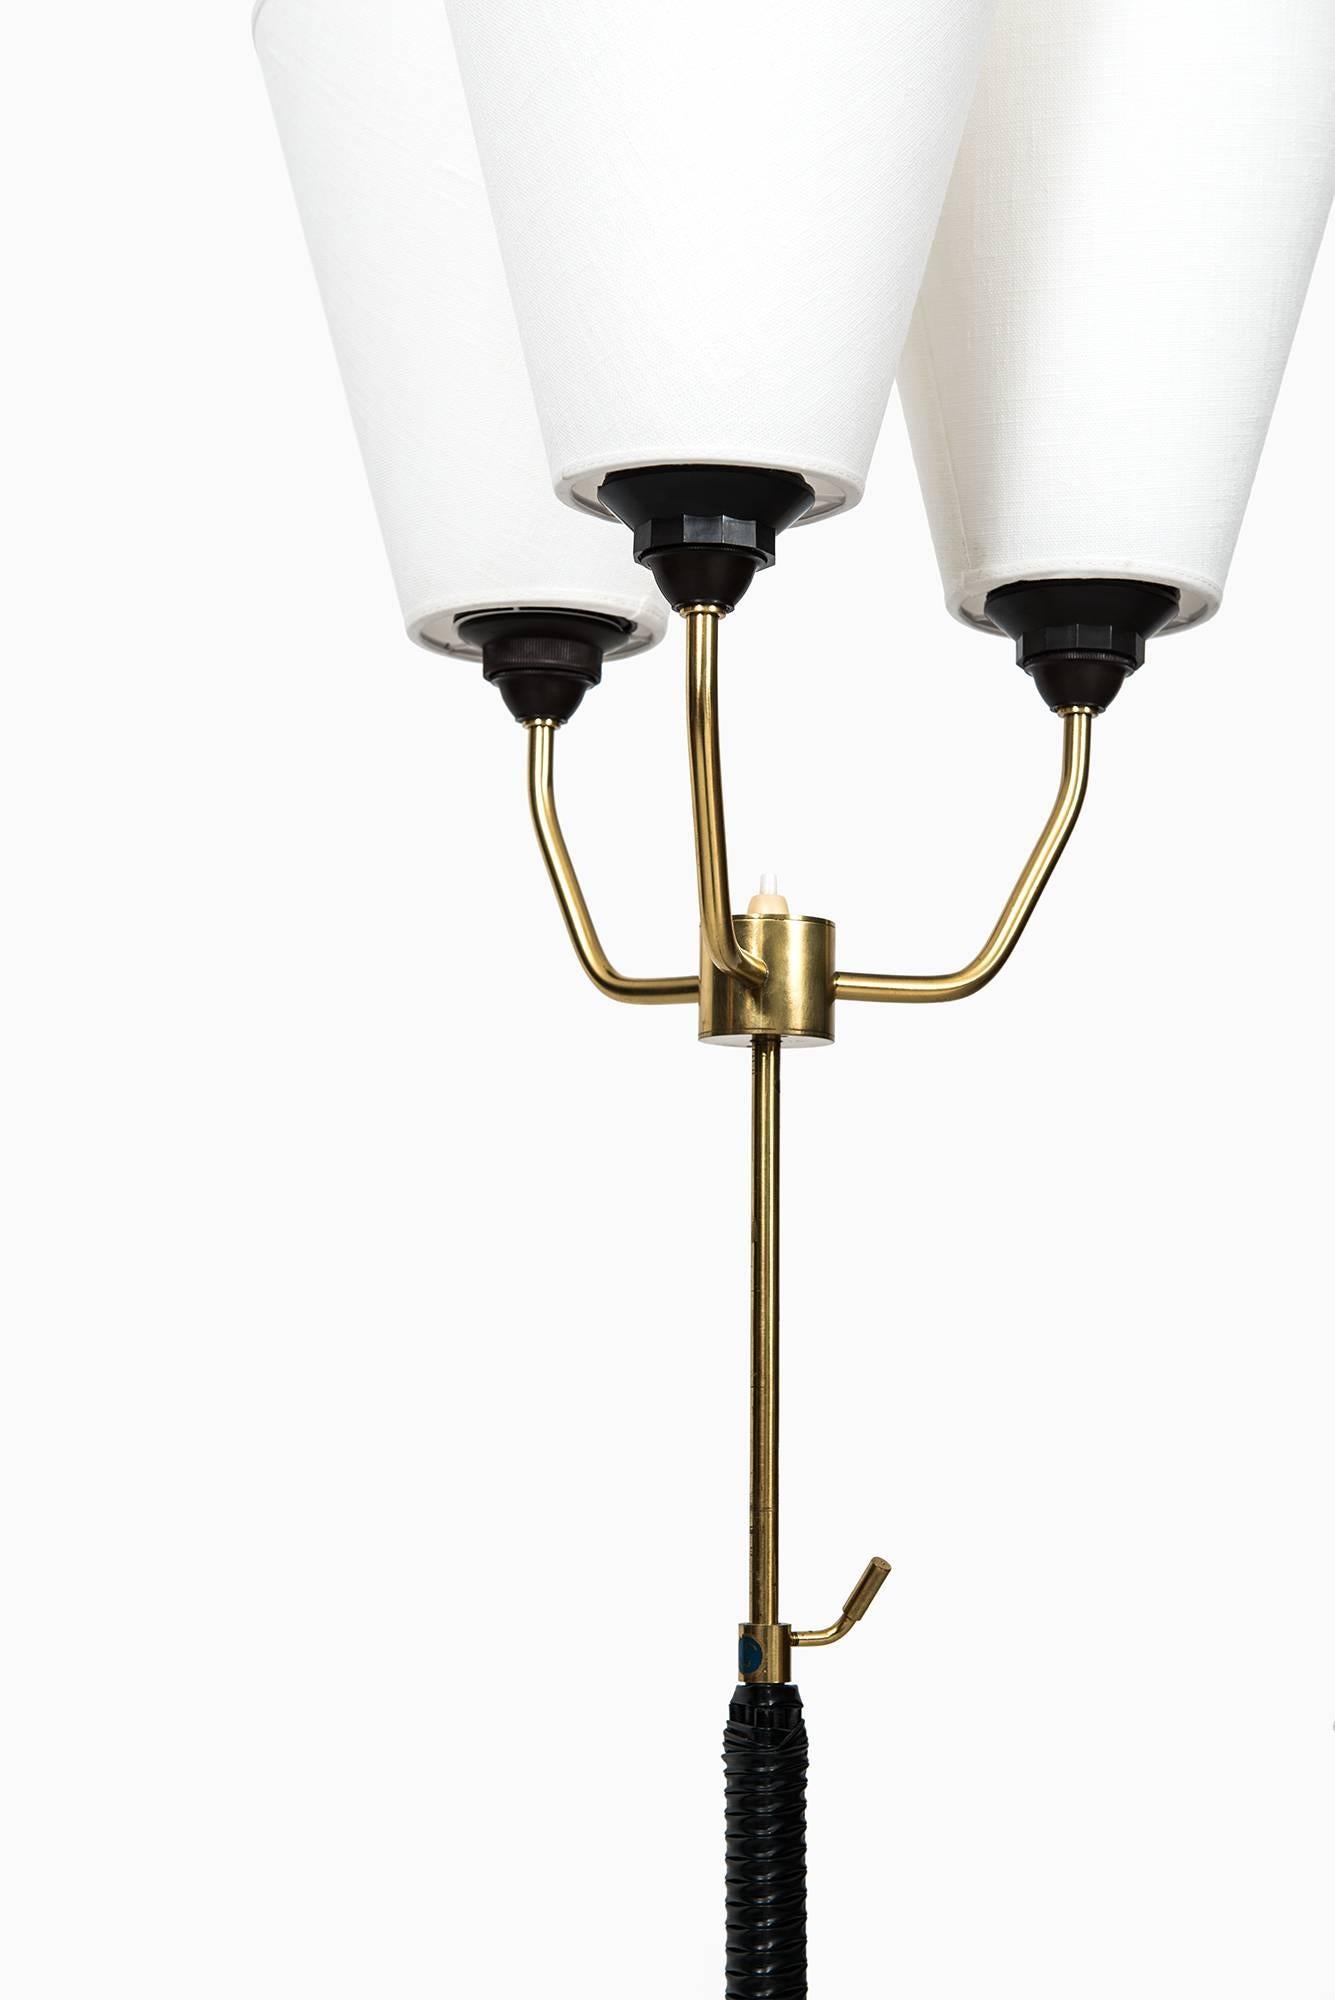 Pair of Height Adjustable Uplights/Floor Lamps Produced in Sweden In Excellent Condition For Sale In Limhamn, Skåne län